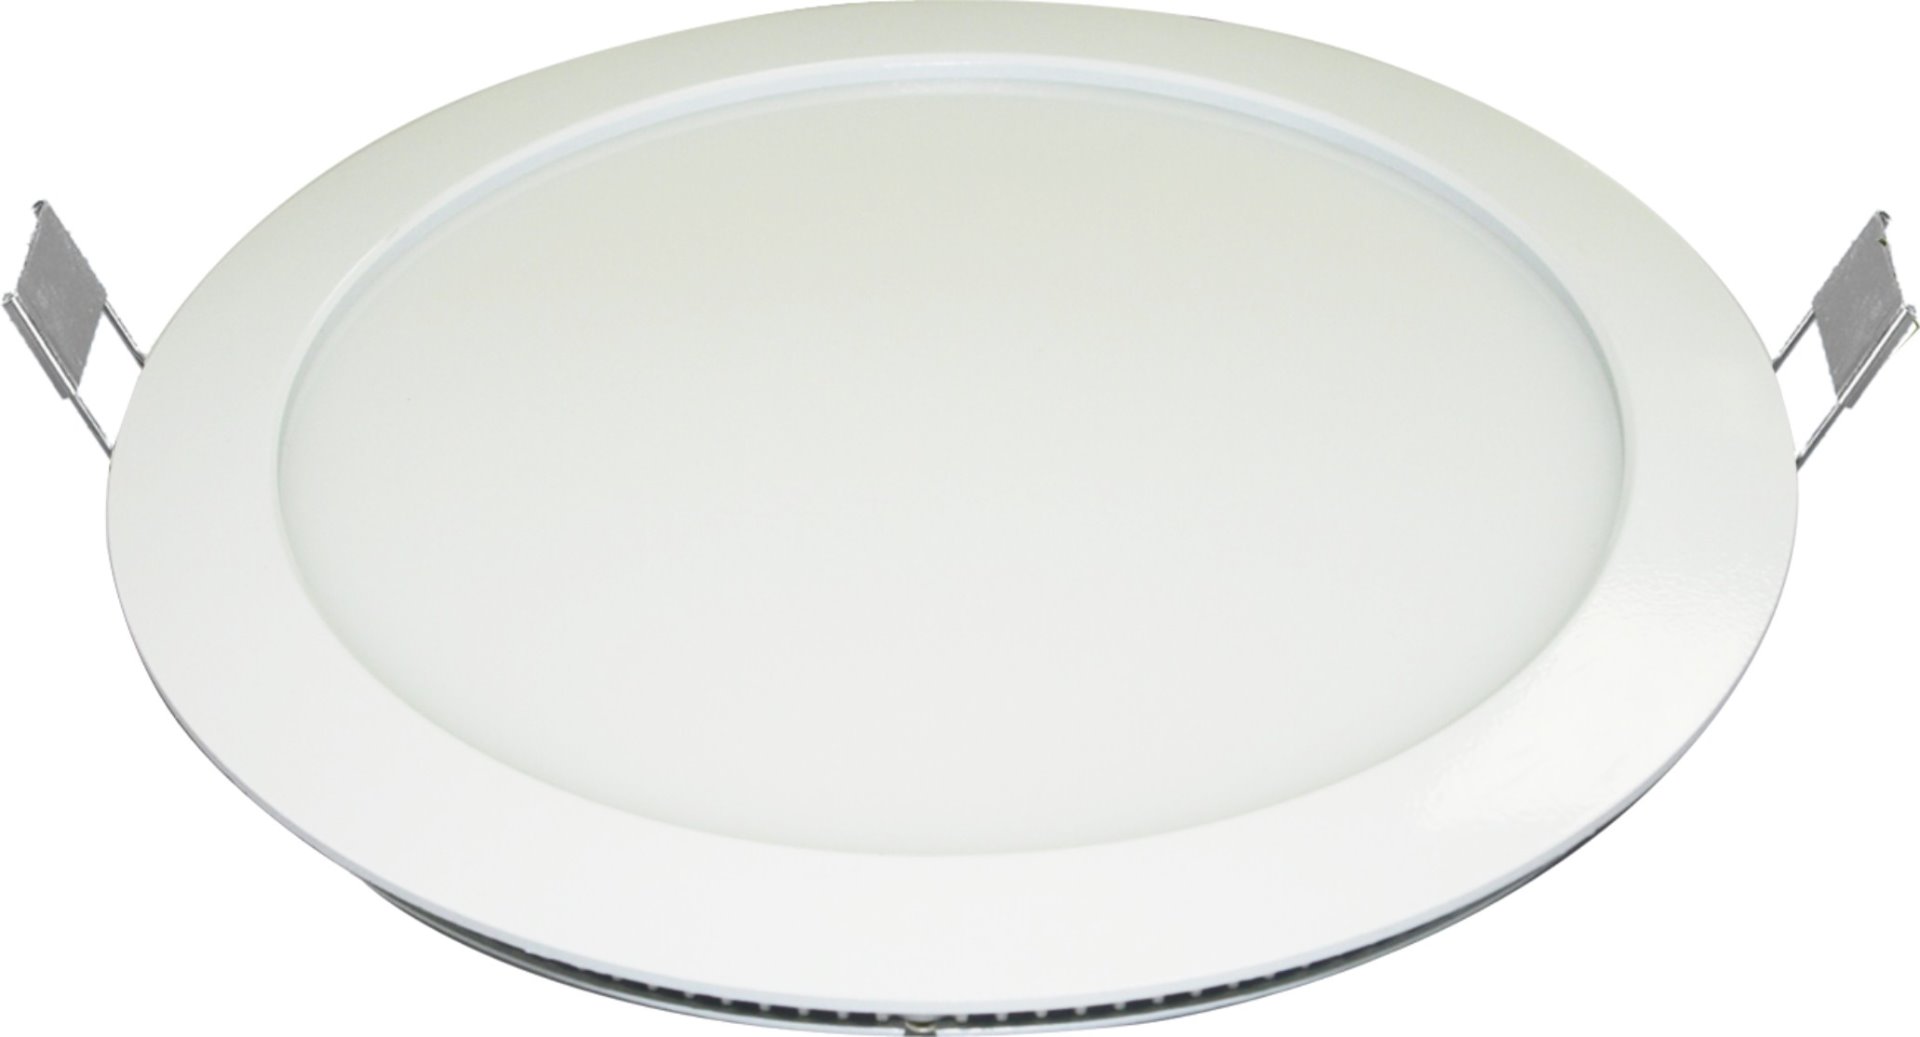 20W CIRCULAR LED PANEL - AVAILABLE IN THREE SHADES OF WHITE